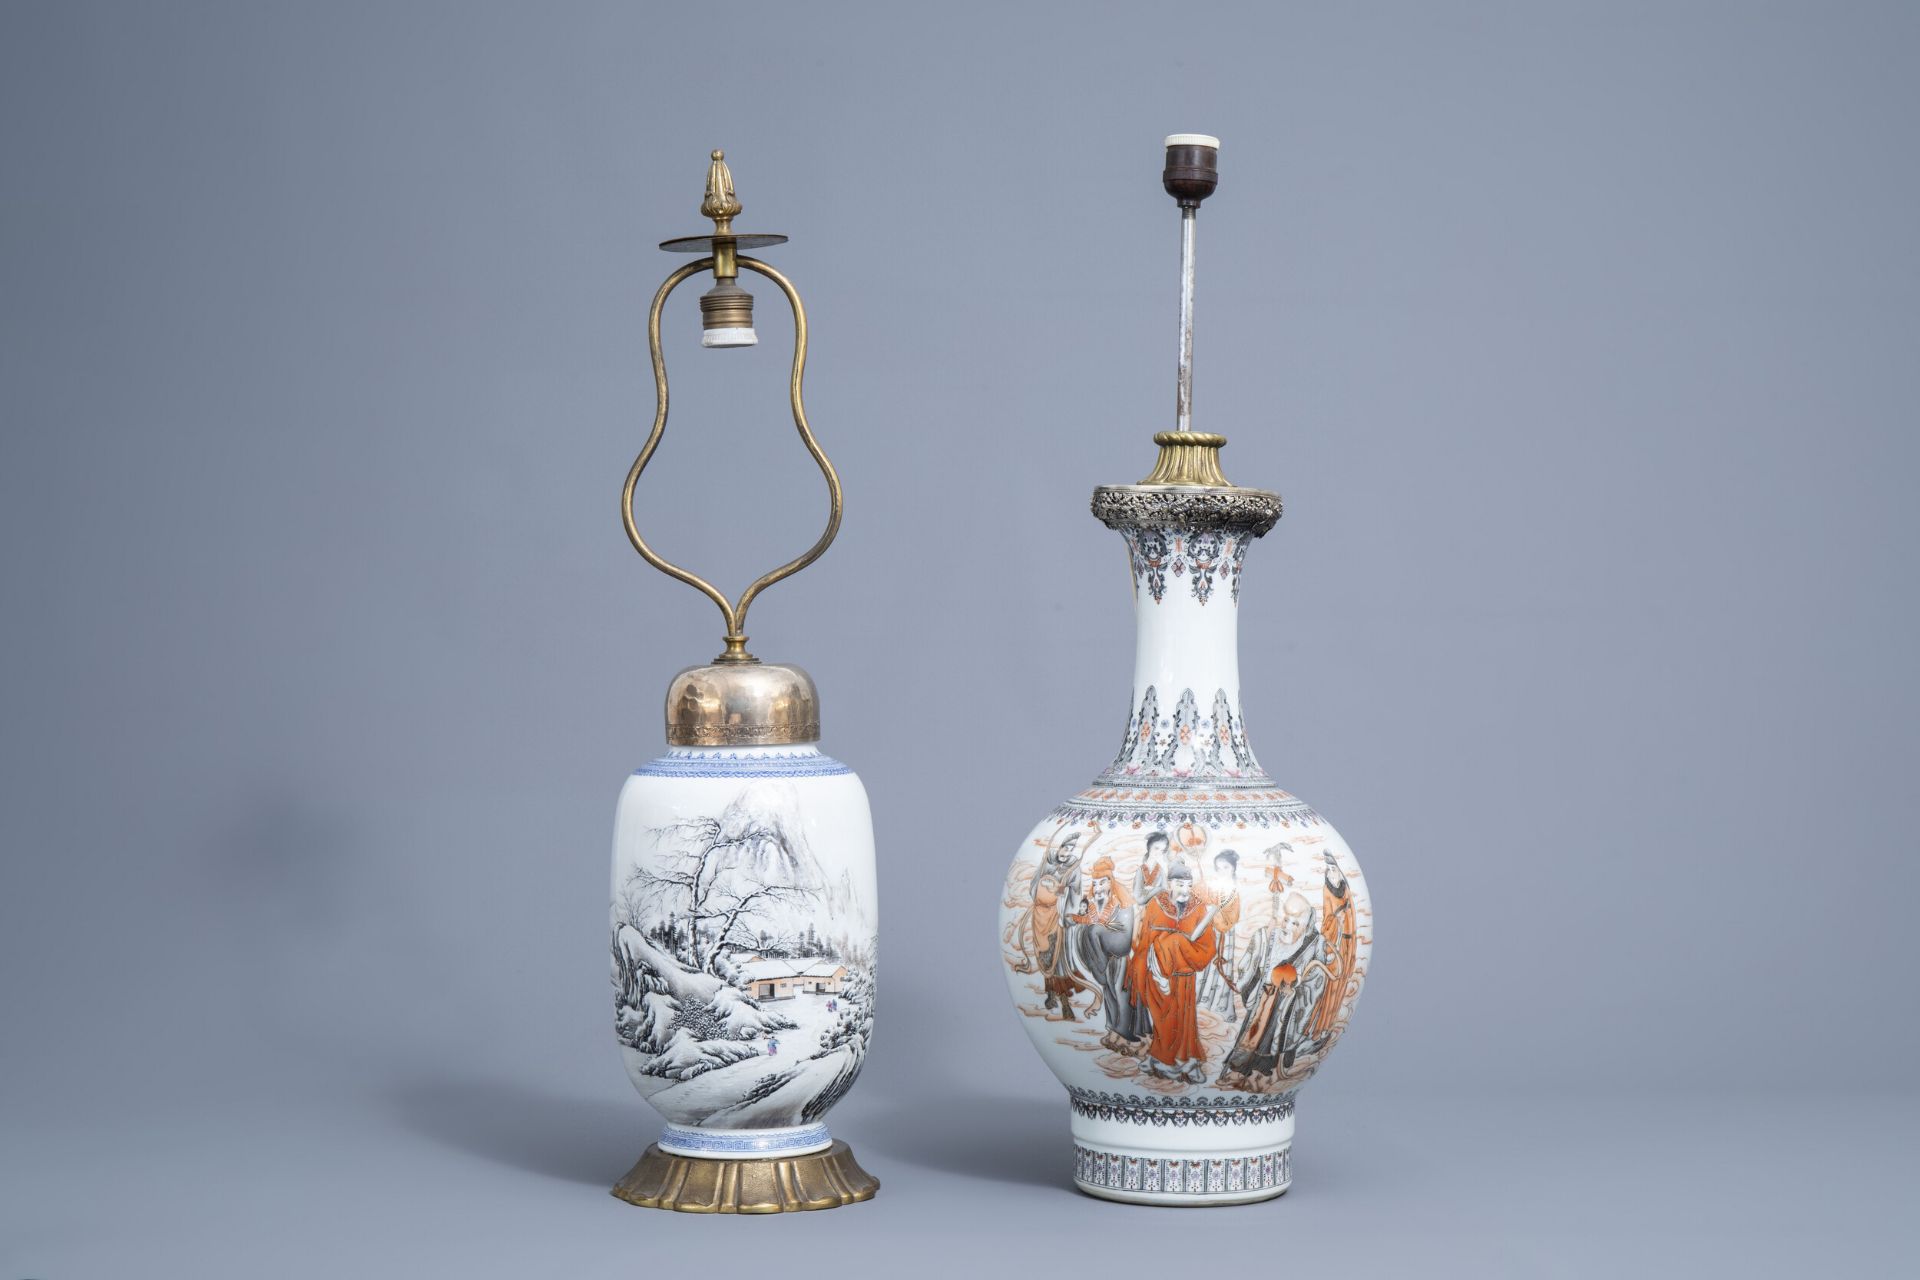 Two Chinese vases with immortals and a winter landscape mounted as lamps, 20th C.